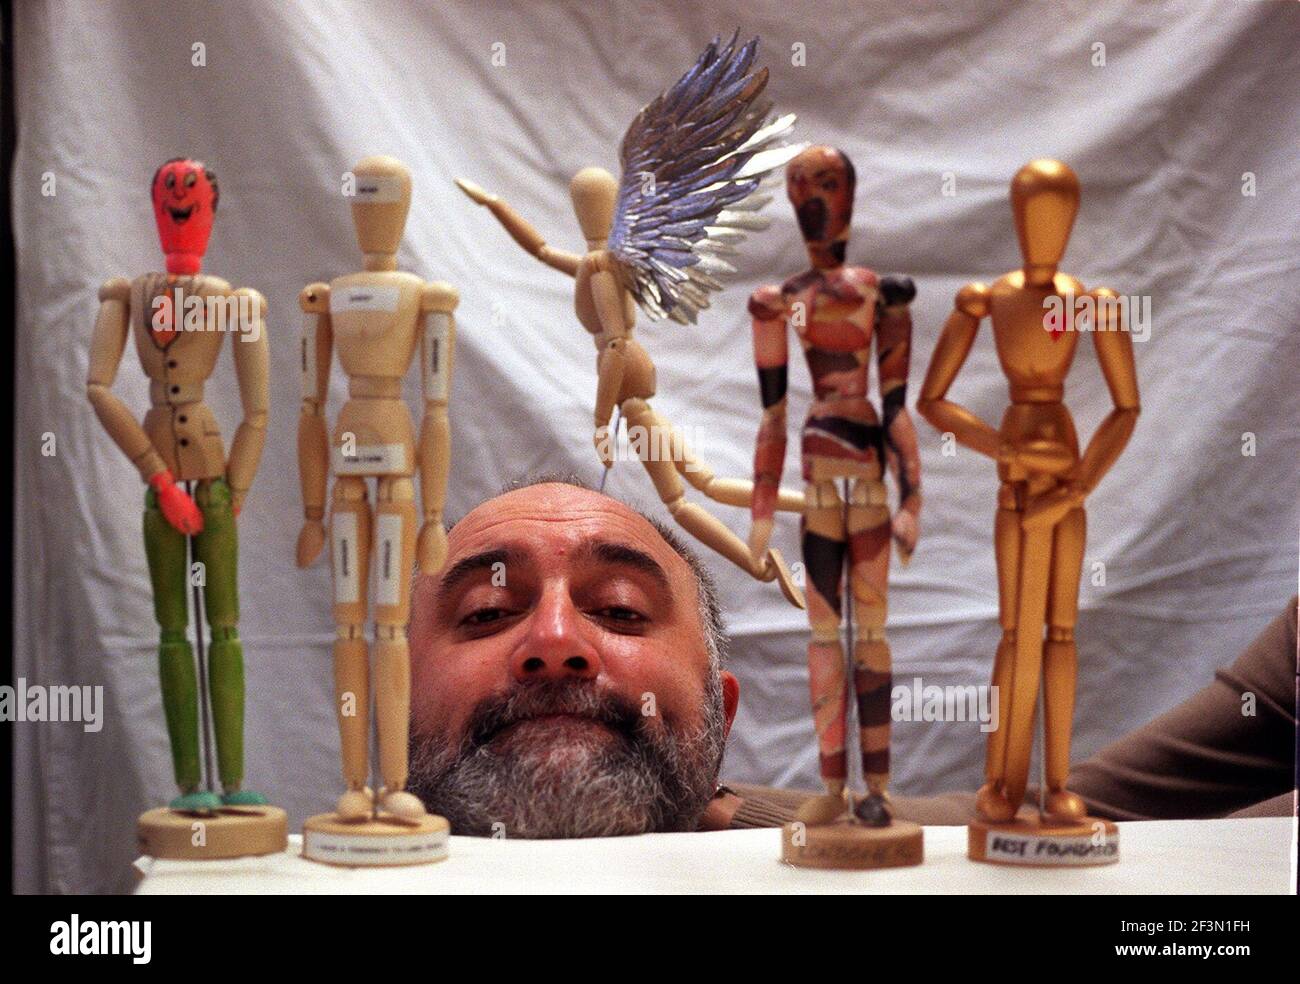 Comedian Alexei Sayle December 1999 The Medical Foundation for The Care of  Victims of Torture sent artist Mannequins to over 100 famous people for them to  turn into works of art which could then be auctioned the collection called Comfort of Strangers is to go on display first pictured is Alexei Sayle who has a mannequin in the set who appeared to launch the whole thing the gold one is by Emma Thompson the patchwork one is by Ken Livingstone,the angel by Richard Hudson and the one with a smiley faceby Norman Wisdom Stock Photo